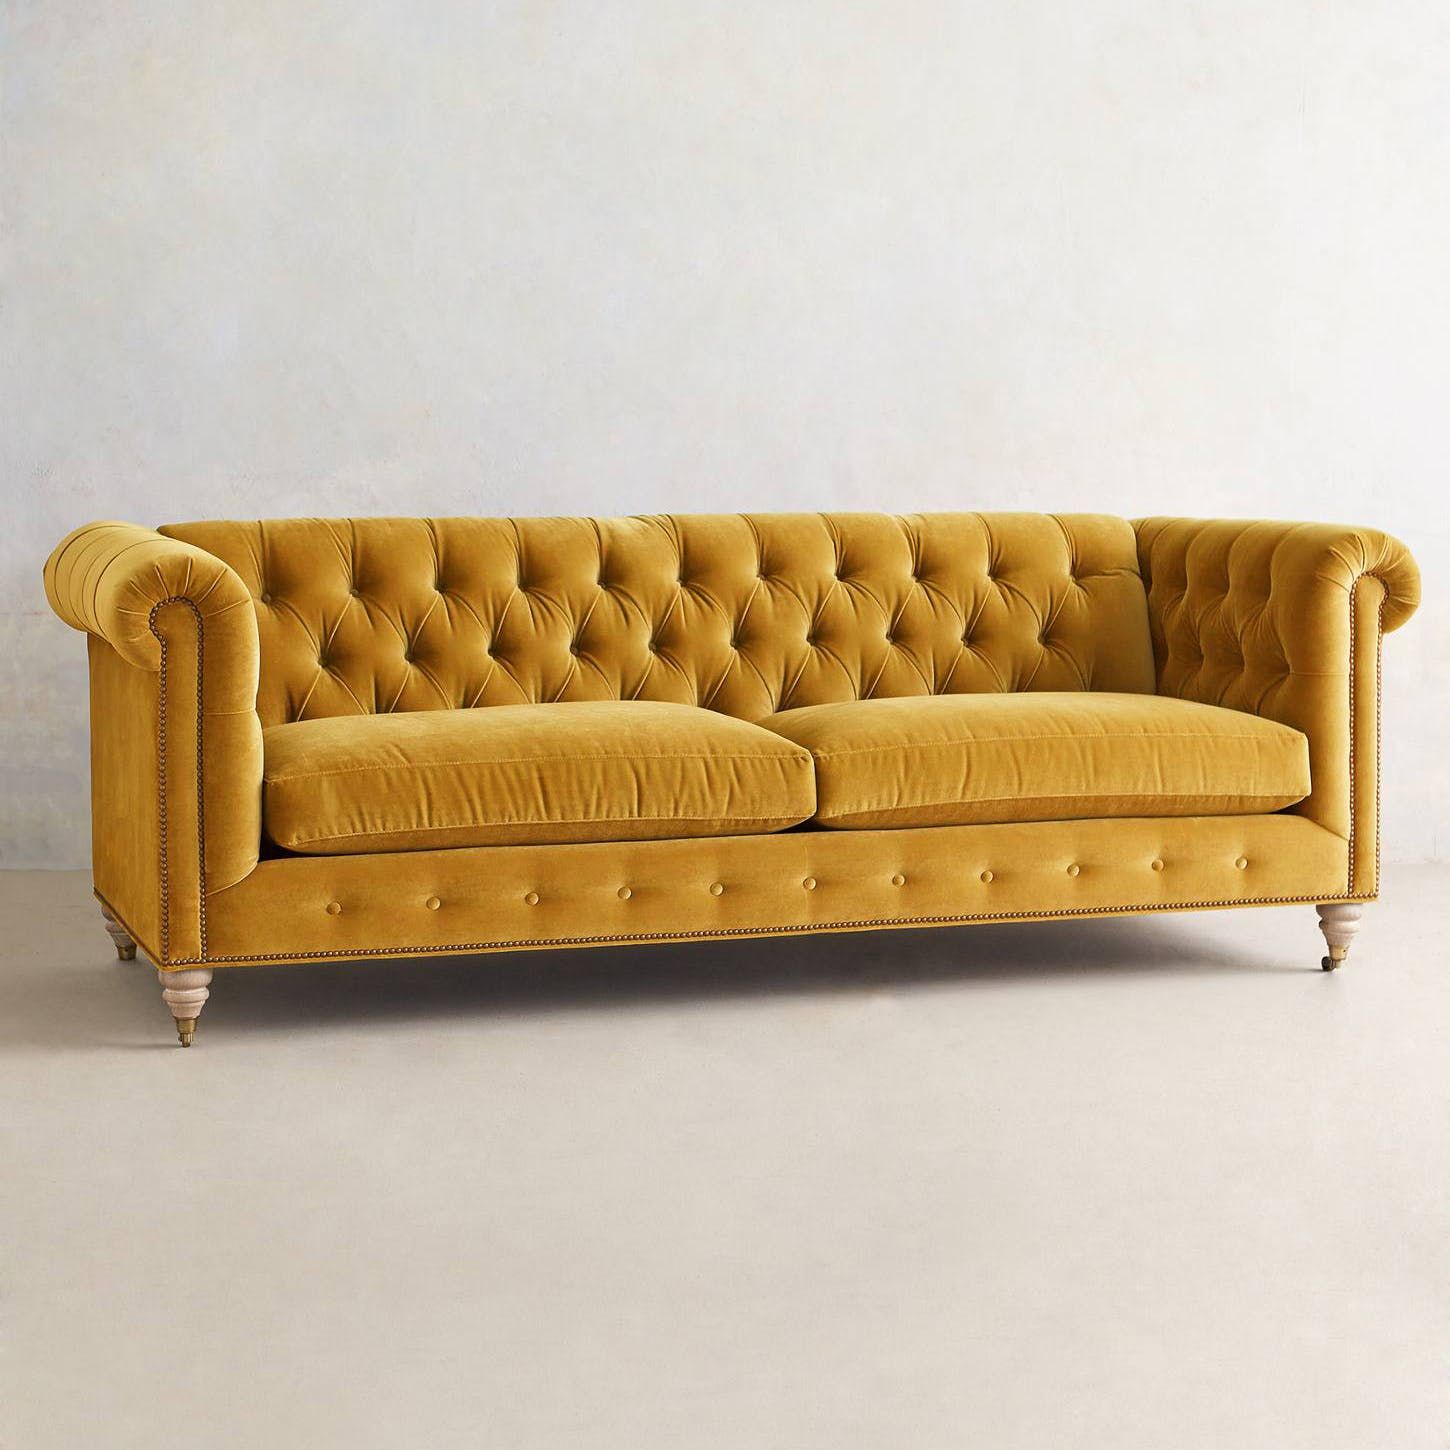 Exploring the History and Design of the
Chesterfield Sofa